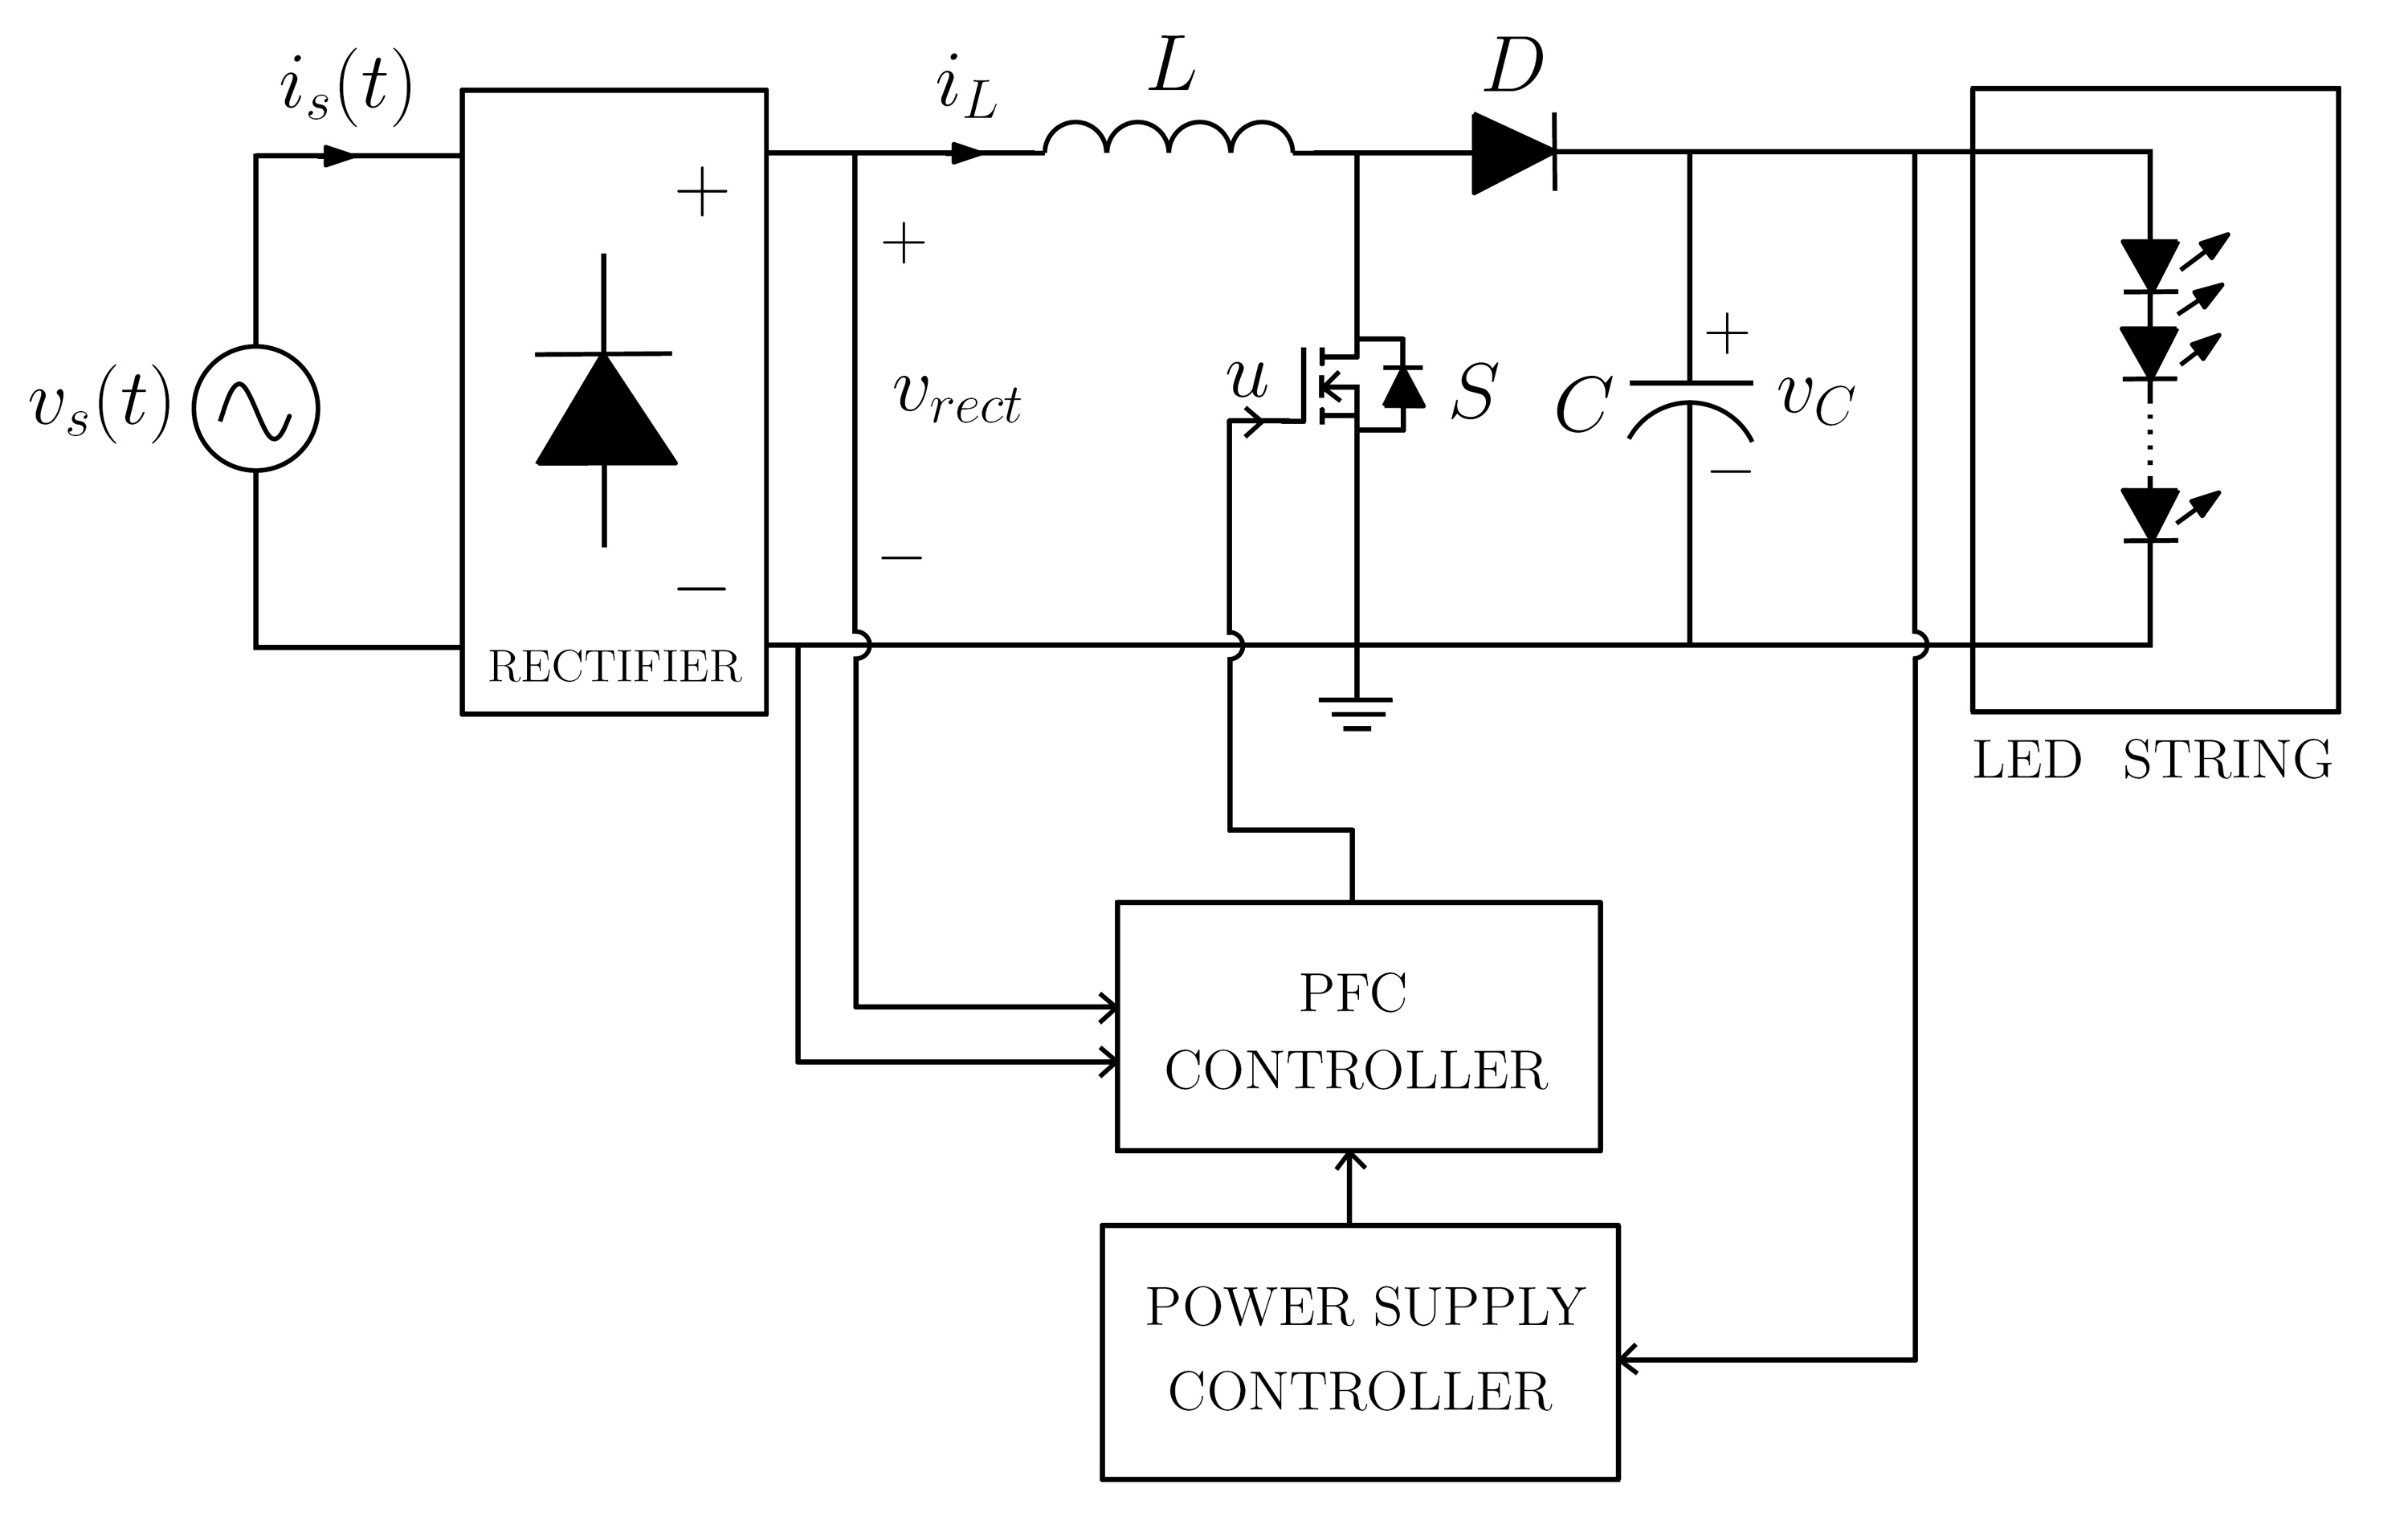 Schematic diagram of a PFC boost converter working as a LED driver.